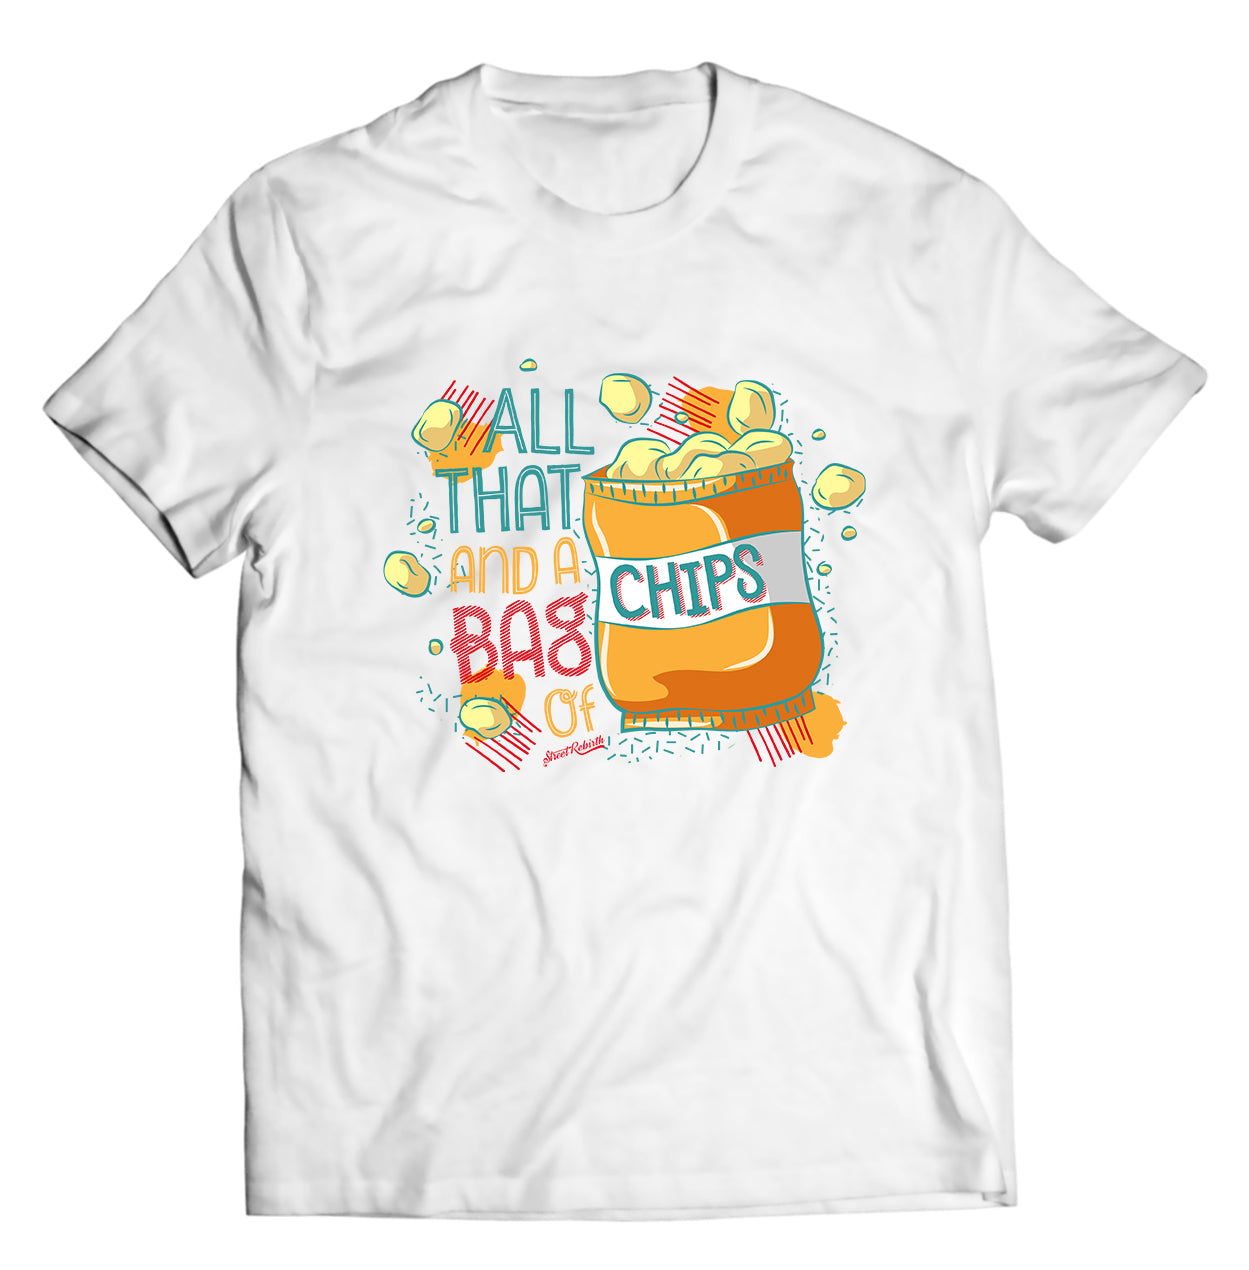 All That And A Bag Of Chips PUN SHIRT - DIRECT TO GARMENT QUALITY PRINT - UNISEX SHIRT